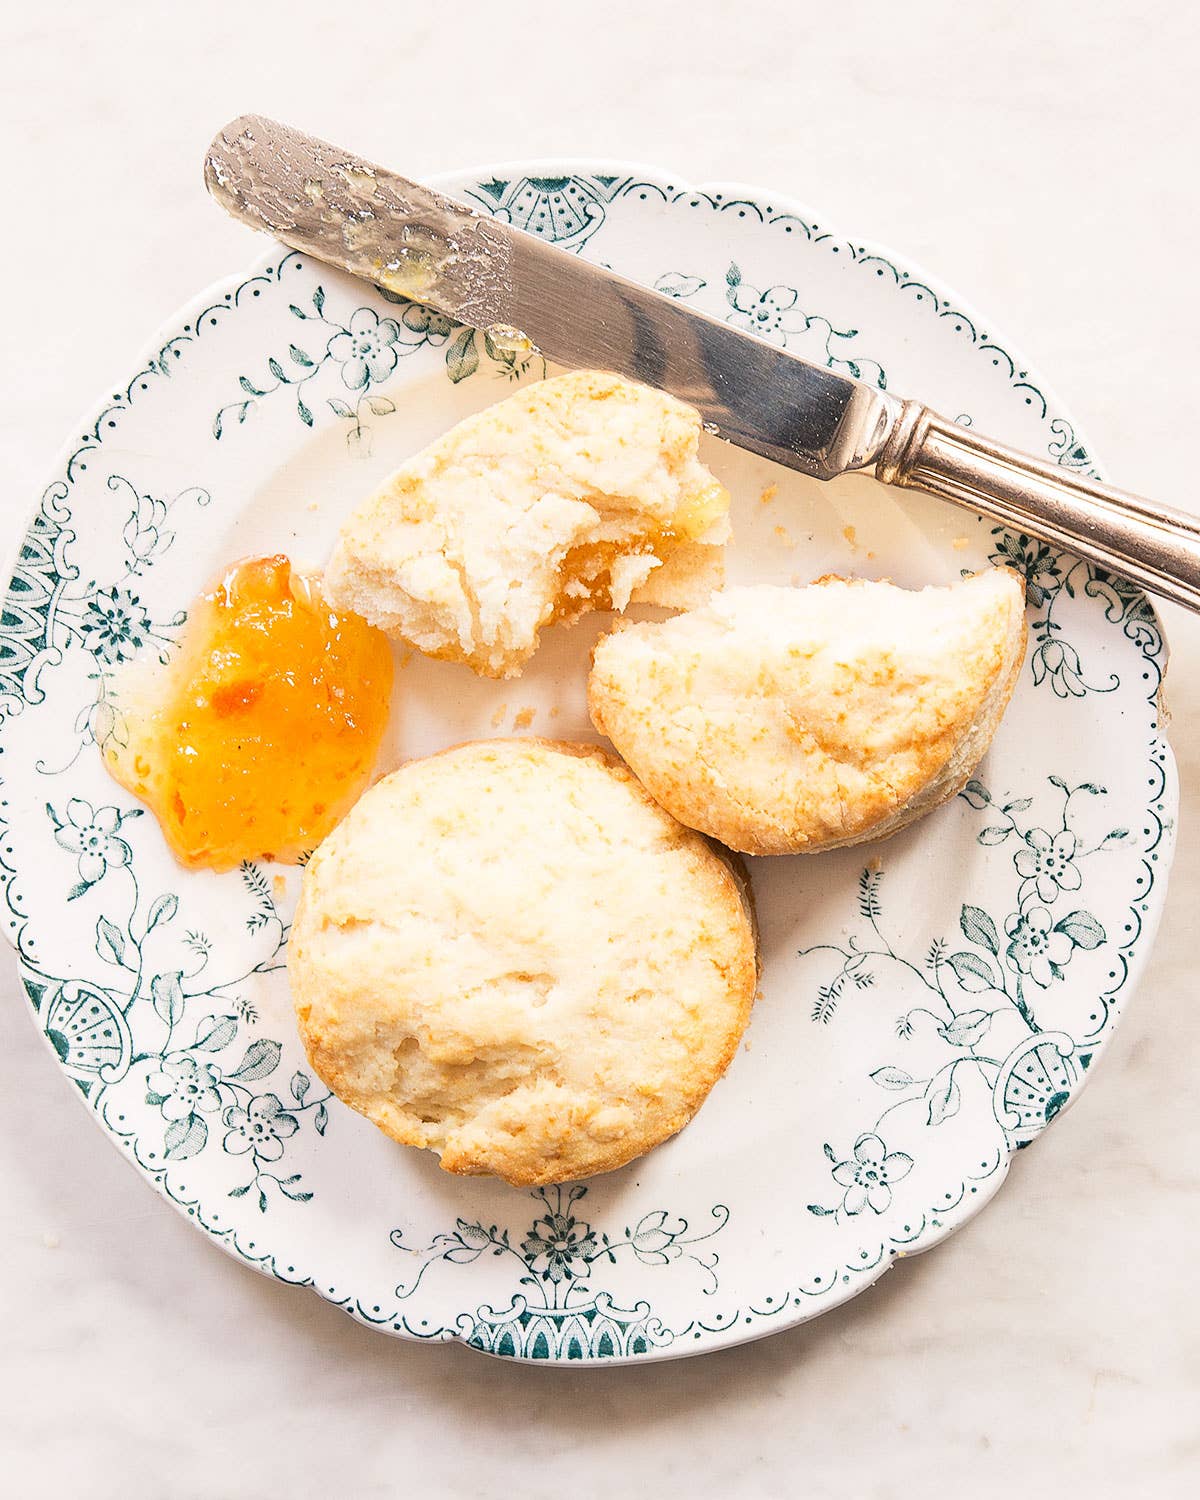 Ruth Reichl’s Search for the Best Biscuit Recipe